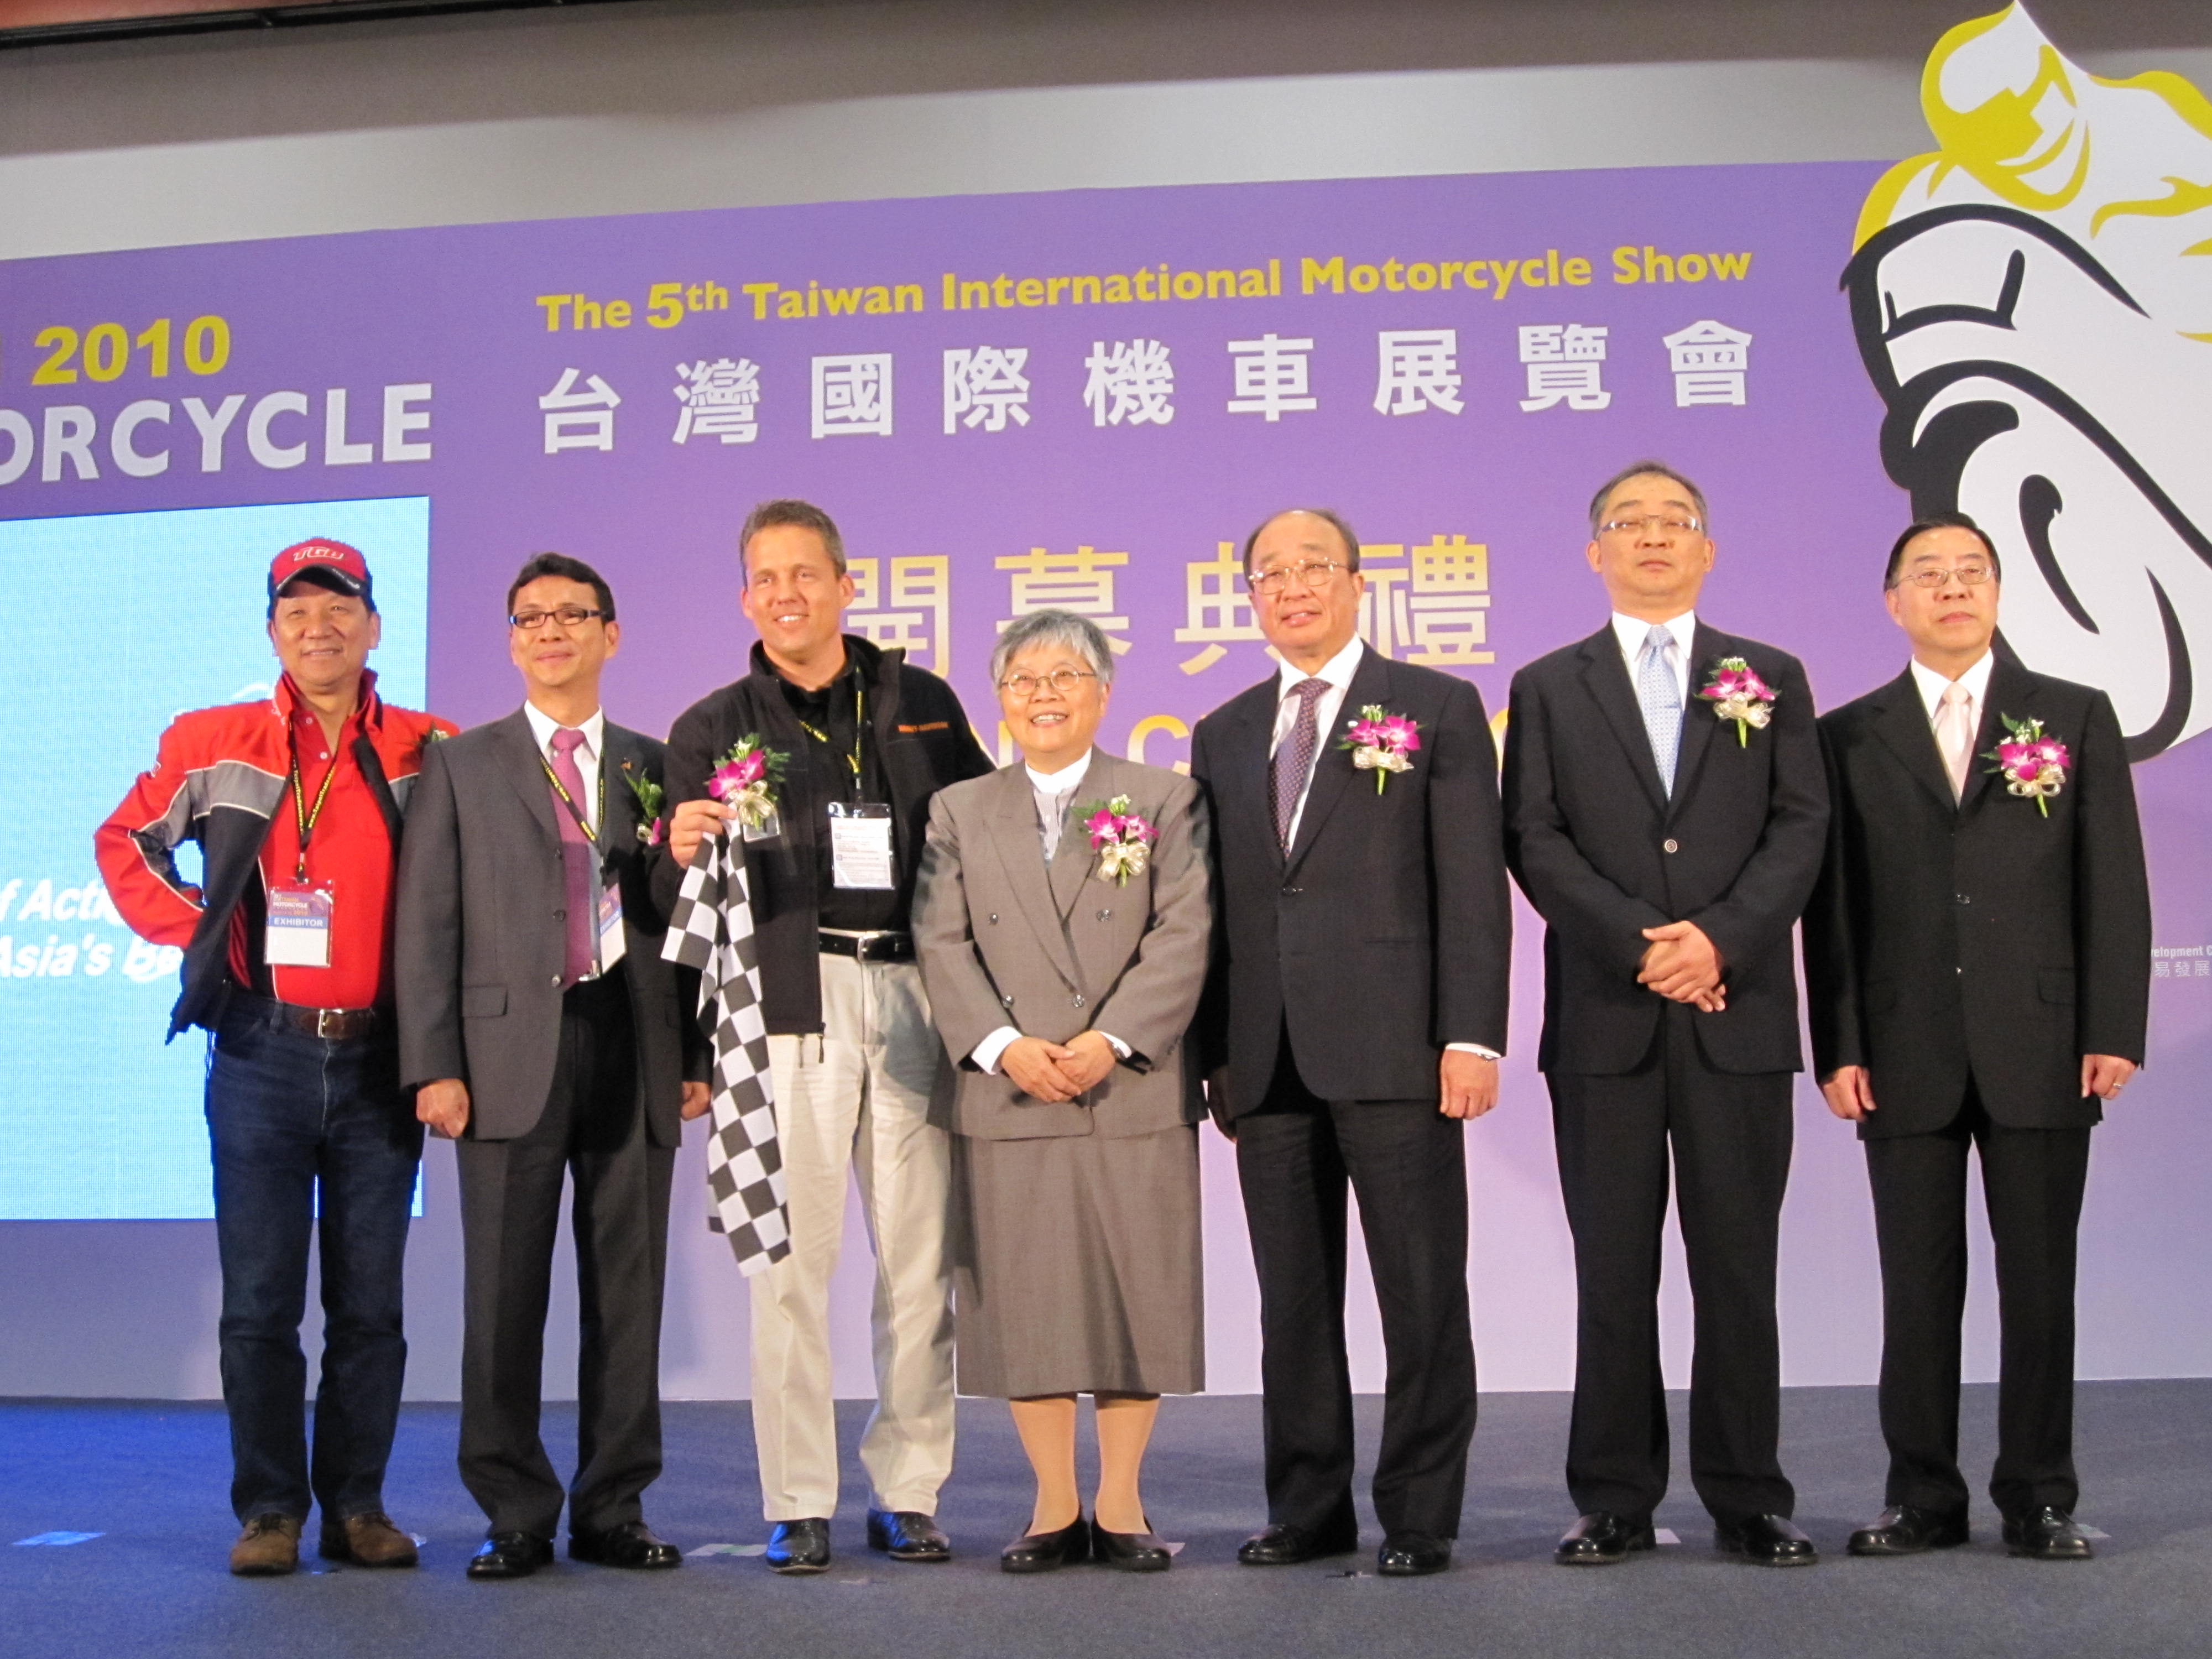 Officials cut ribbon to open 2010 Motorcycle Taiwan.